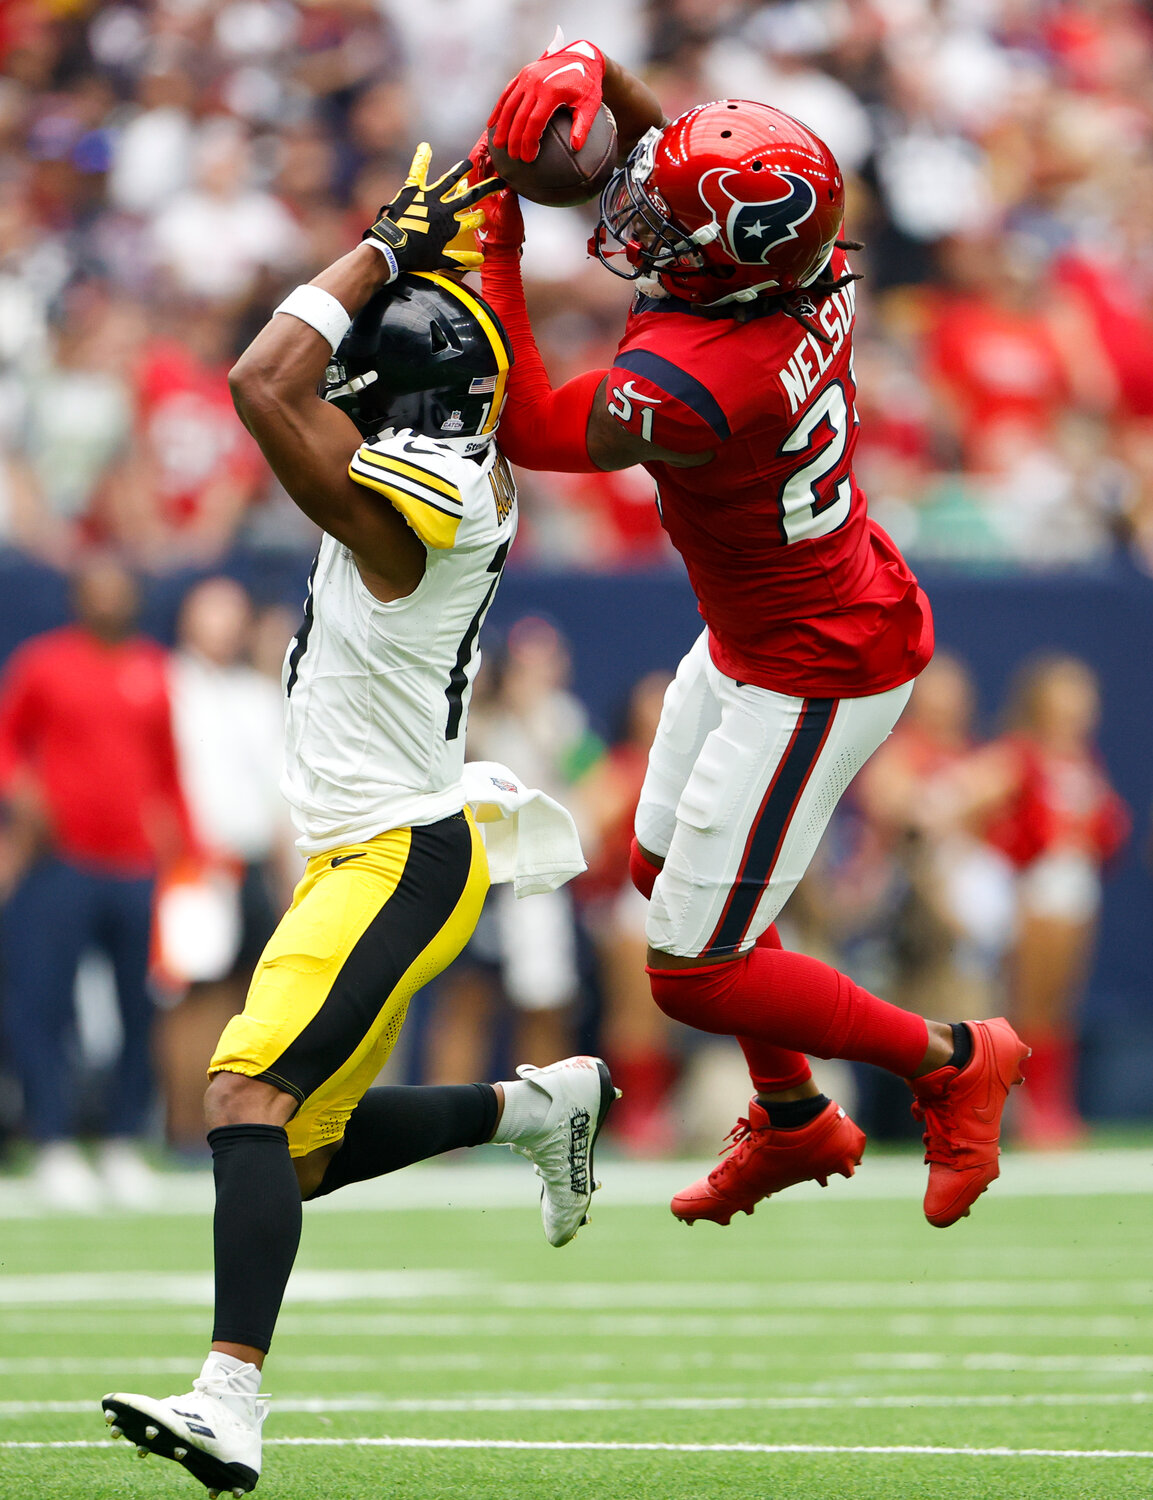 Texans cornerback Steven Nelson (21) leaps to intercept a pass intended for Steelers wide receiver Calvin Austin III (19) during an NFL game between the Texans and the Steelers on October 1, 2023 in Houston.